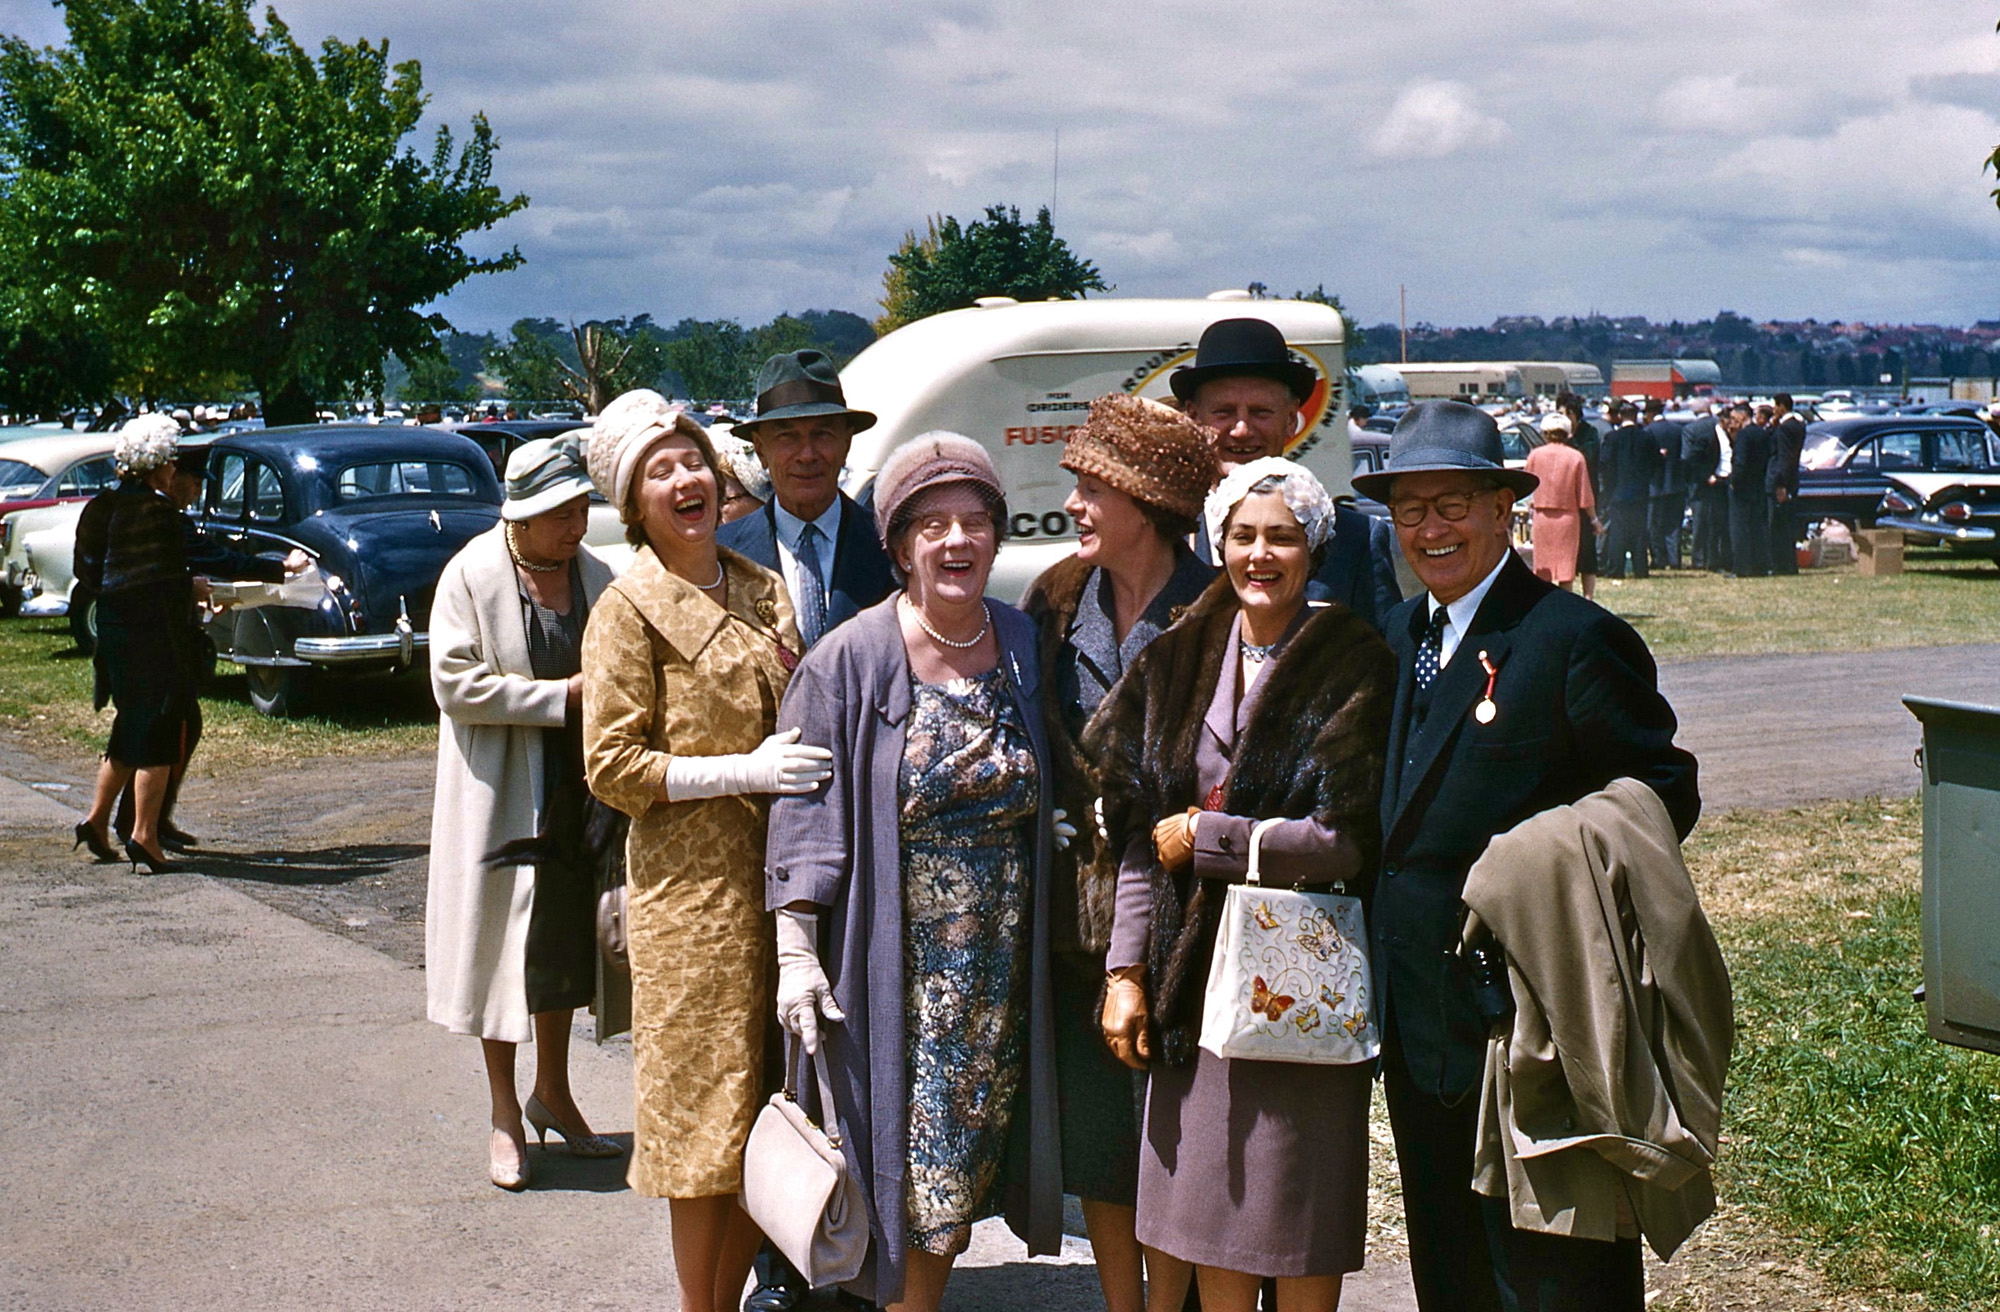 My father, John McIntyre, took this Kodachrome in 1959. It shows a group of Ford Motor Company of Australia staff and wives attending the Melbourne Cup at the Flemington Racecourse. Third from left is Charlie Smith, and my mother, Betty, is looking sideways in the brown hat. The man in the Homburg hat is "Norrie" Norris, and standing in front of him is his wife Trixie. What you see here is the Aussie version of a "tailgate party" prior to the races. It is still a dress-up affair to this day - click here for photos. View full size.